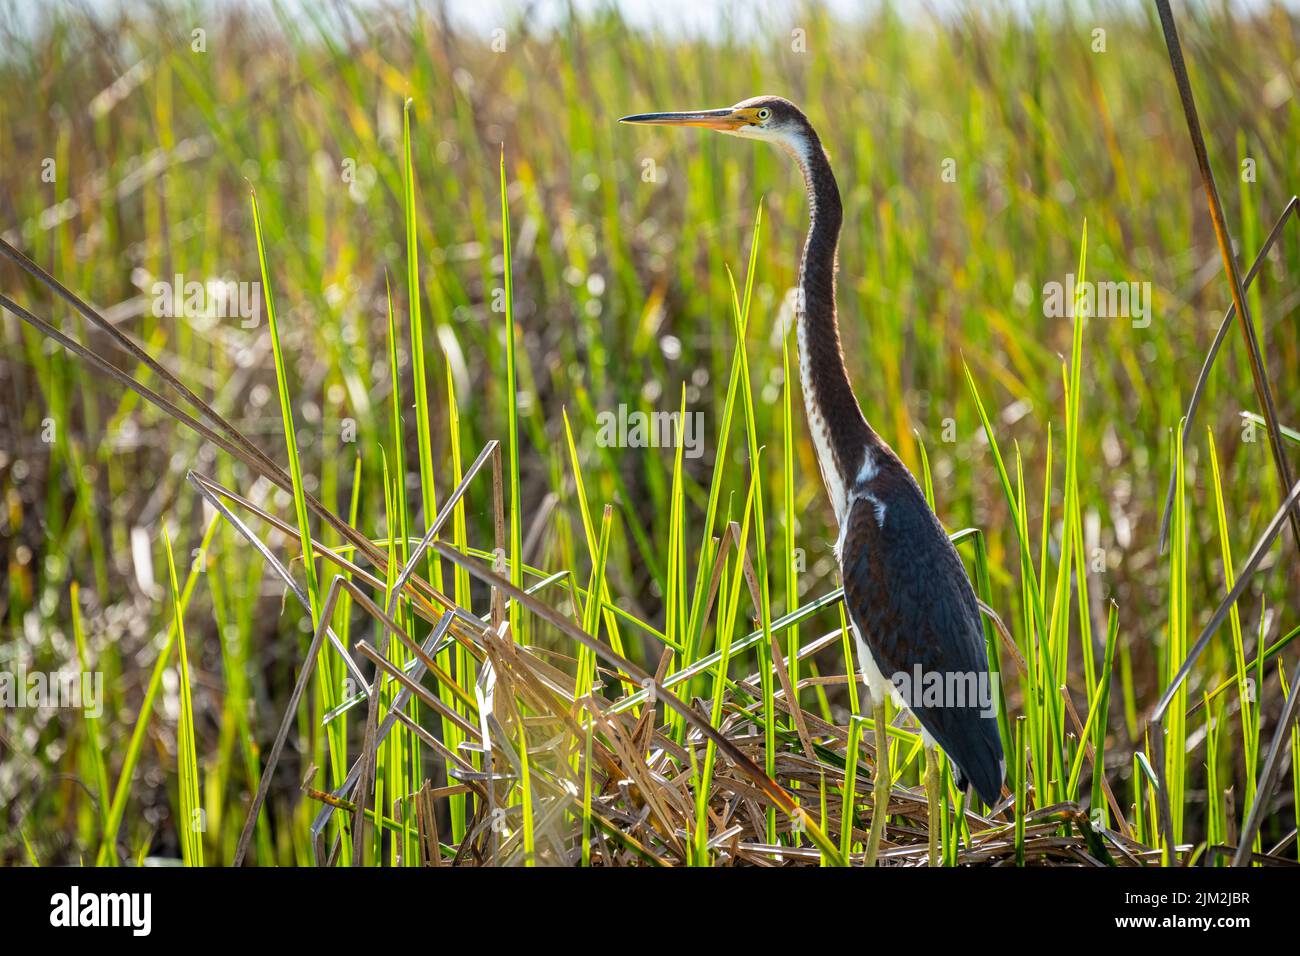 Tricolored heron (Egretta tricolor) among the marsh grass on the Guana River in Ponte Vedra Beach, Florida. (USA) Stock Photo